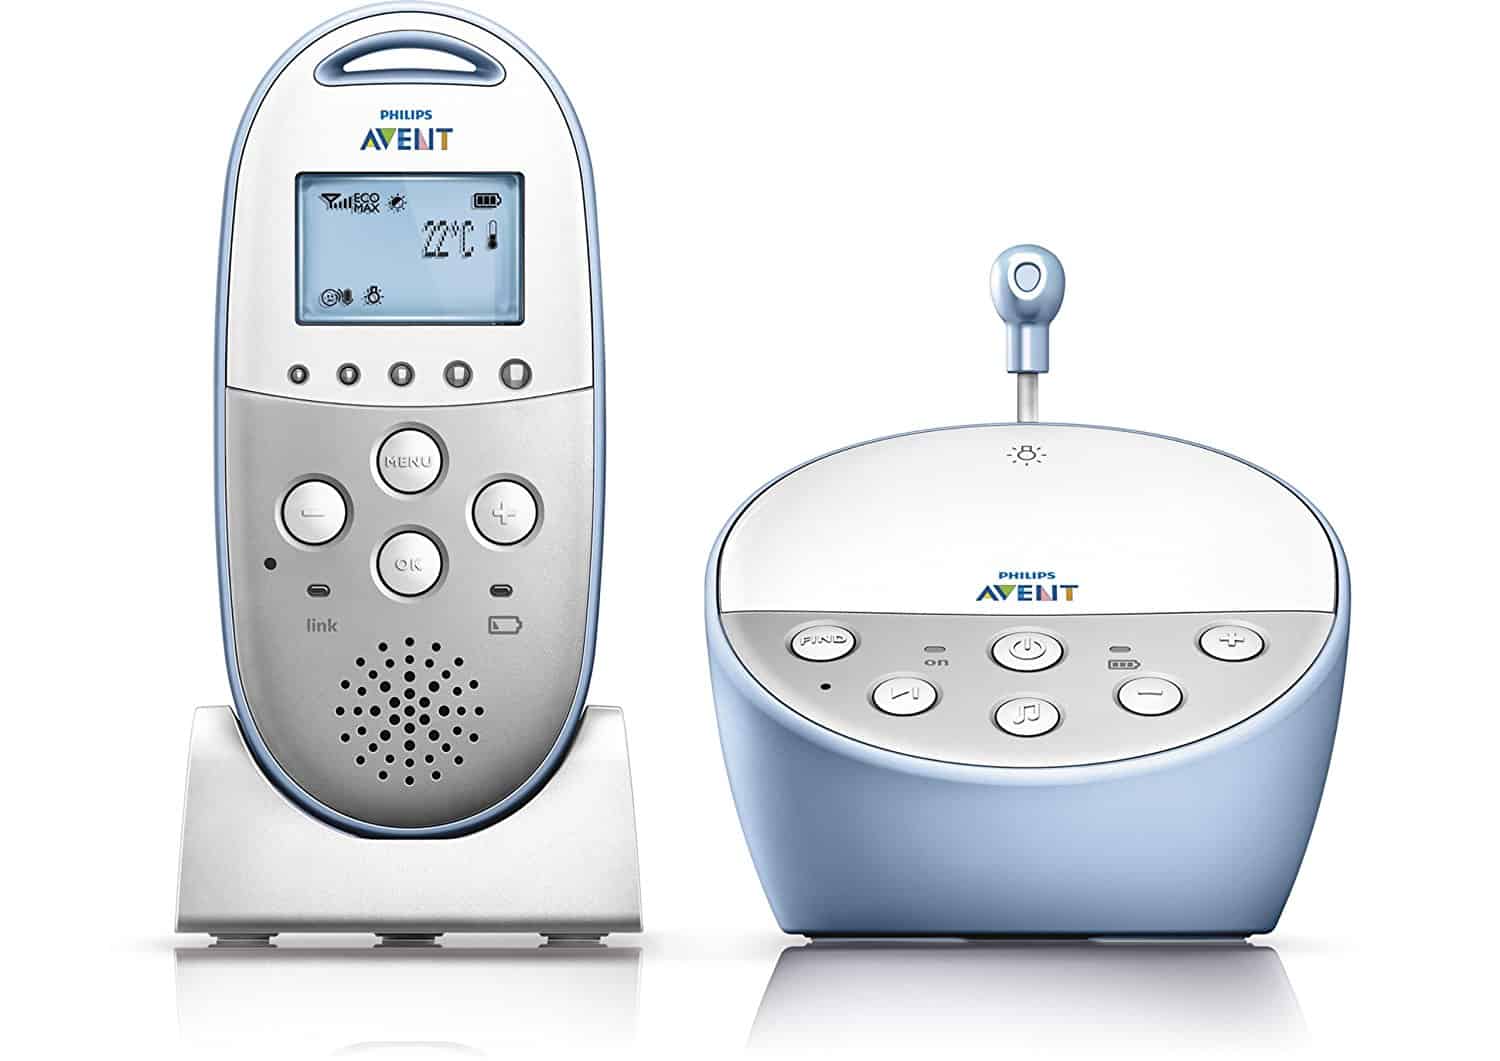 Philips avent Dect Baby Monitor White